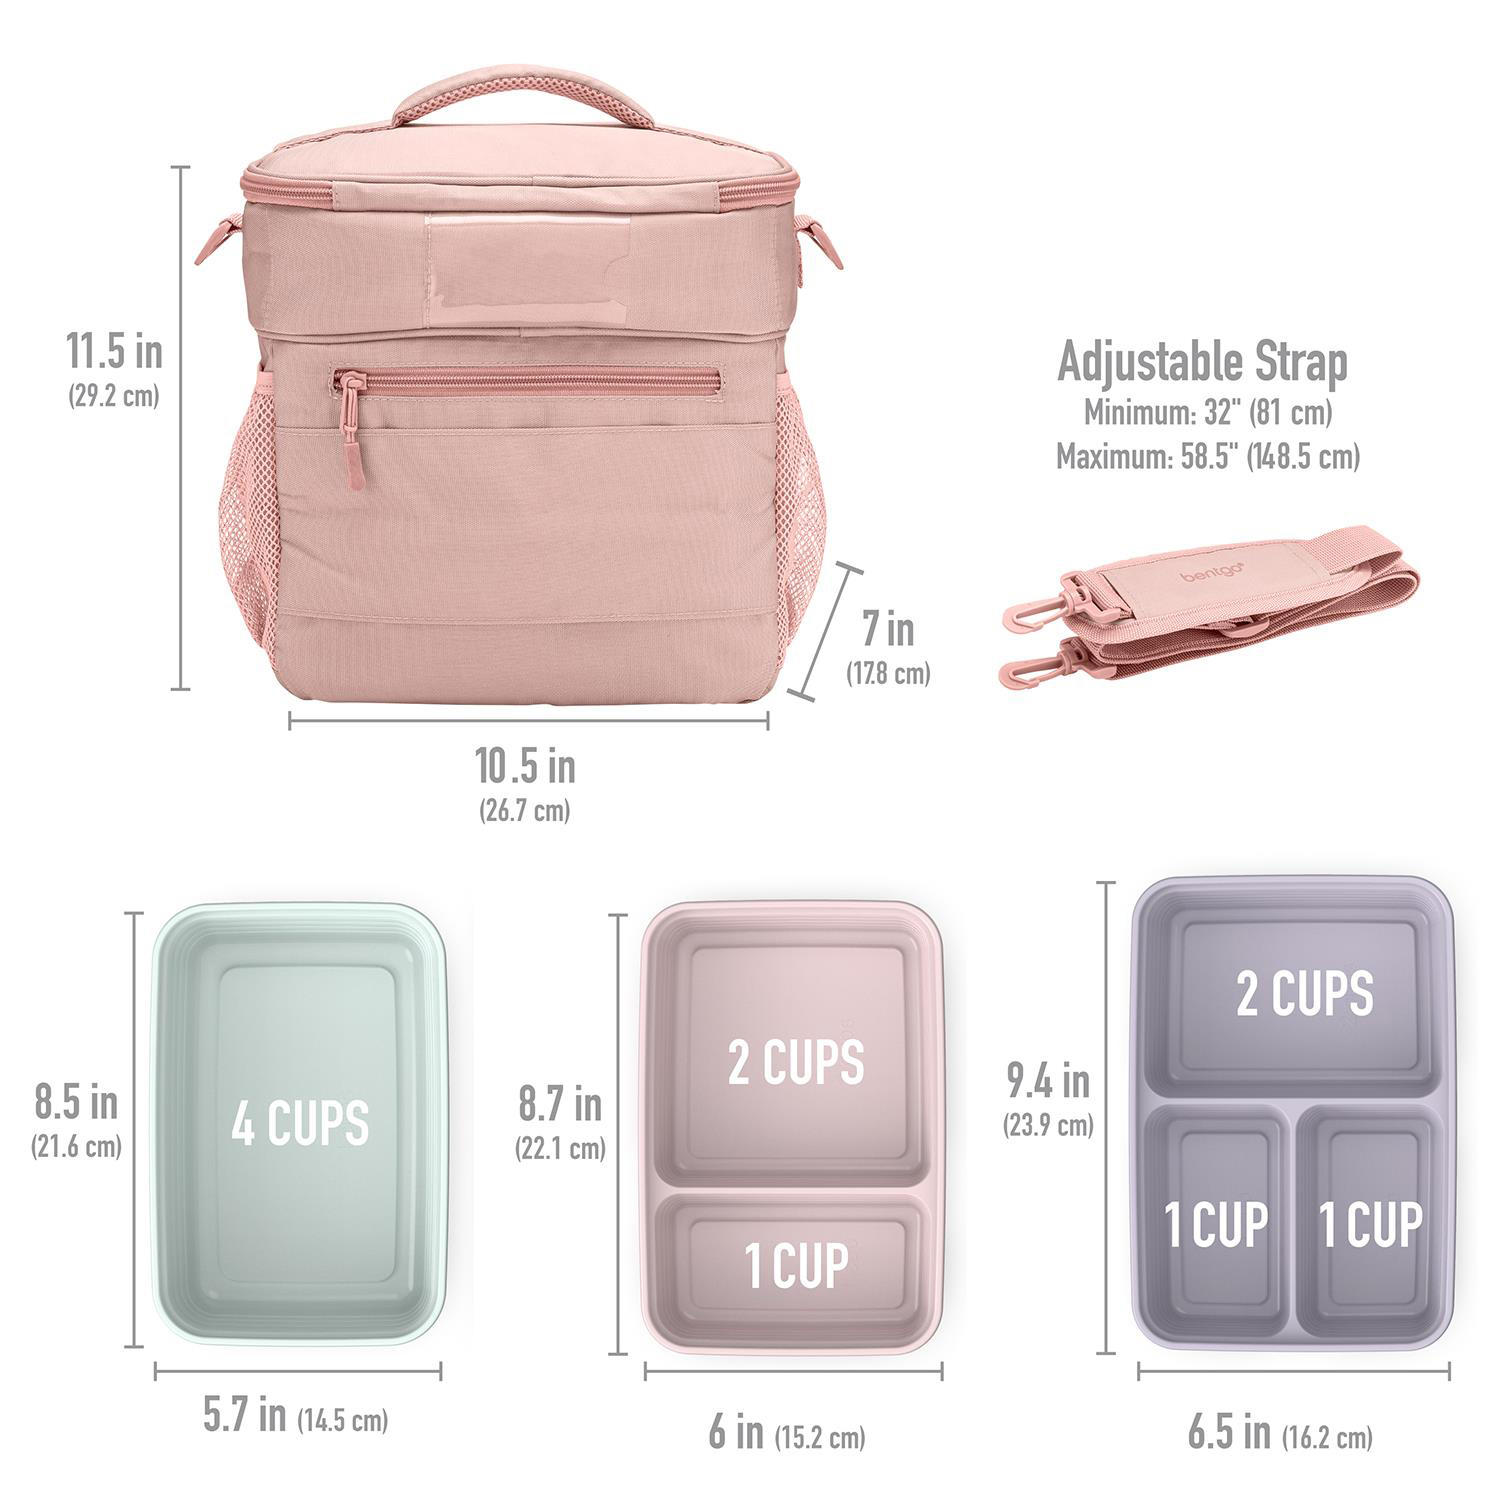 https://bigbigmart.com/wp-content/uploads/2022/07/Bentgo%C2%AE-Prep-Deluxe-Multimeal-Bag-Premium-Insulation-up-to-8-Hrs-with-Water-Resistant-Exterior-Interior-Extra-Large-Lunch-Bag-Holds-4-Meals-Snacks-Great-for-All-Day-Meal-Prep-Blush13.jpg